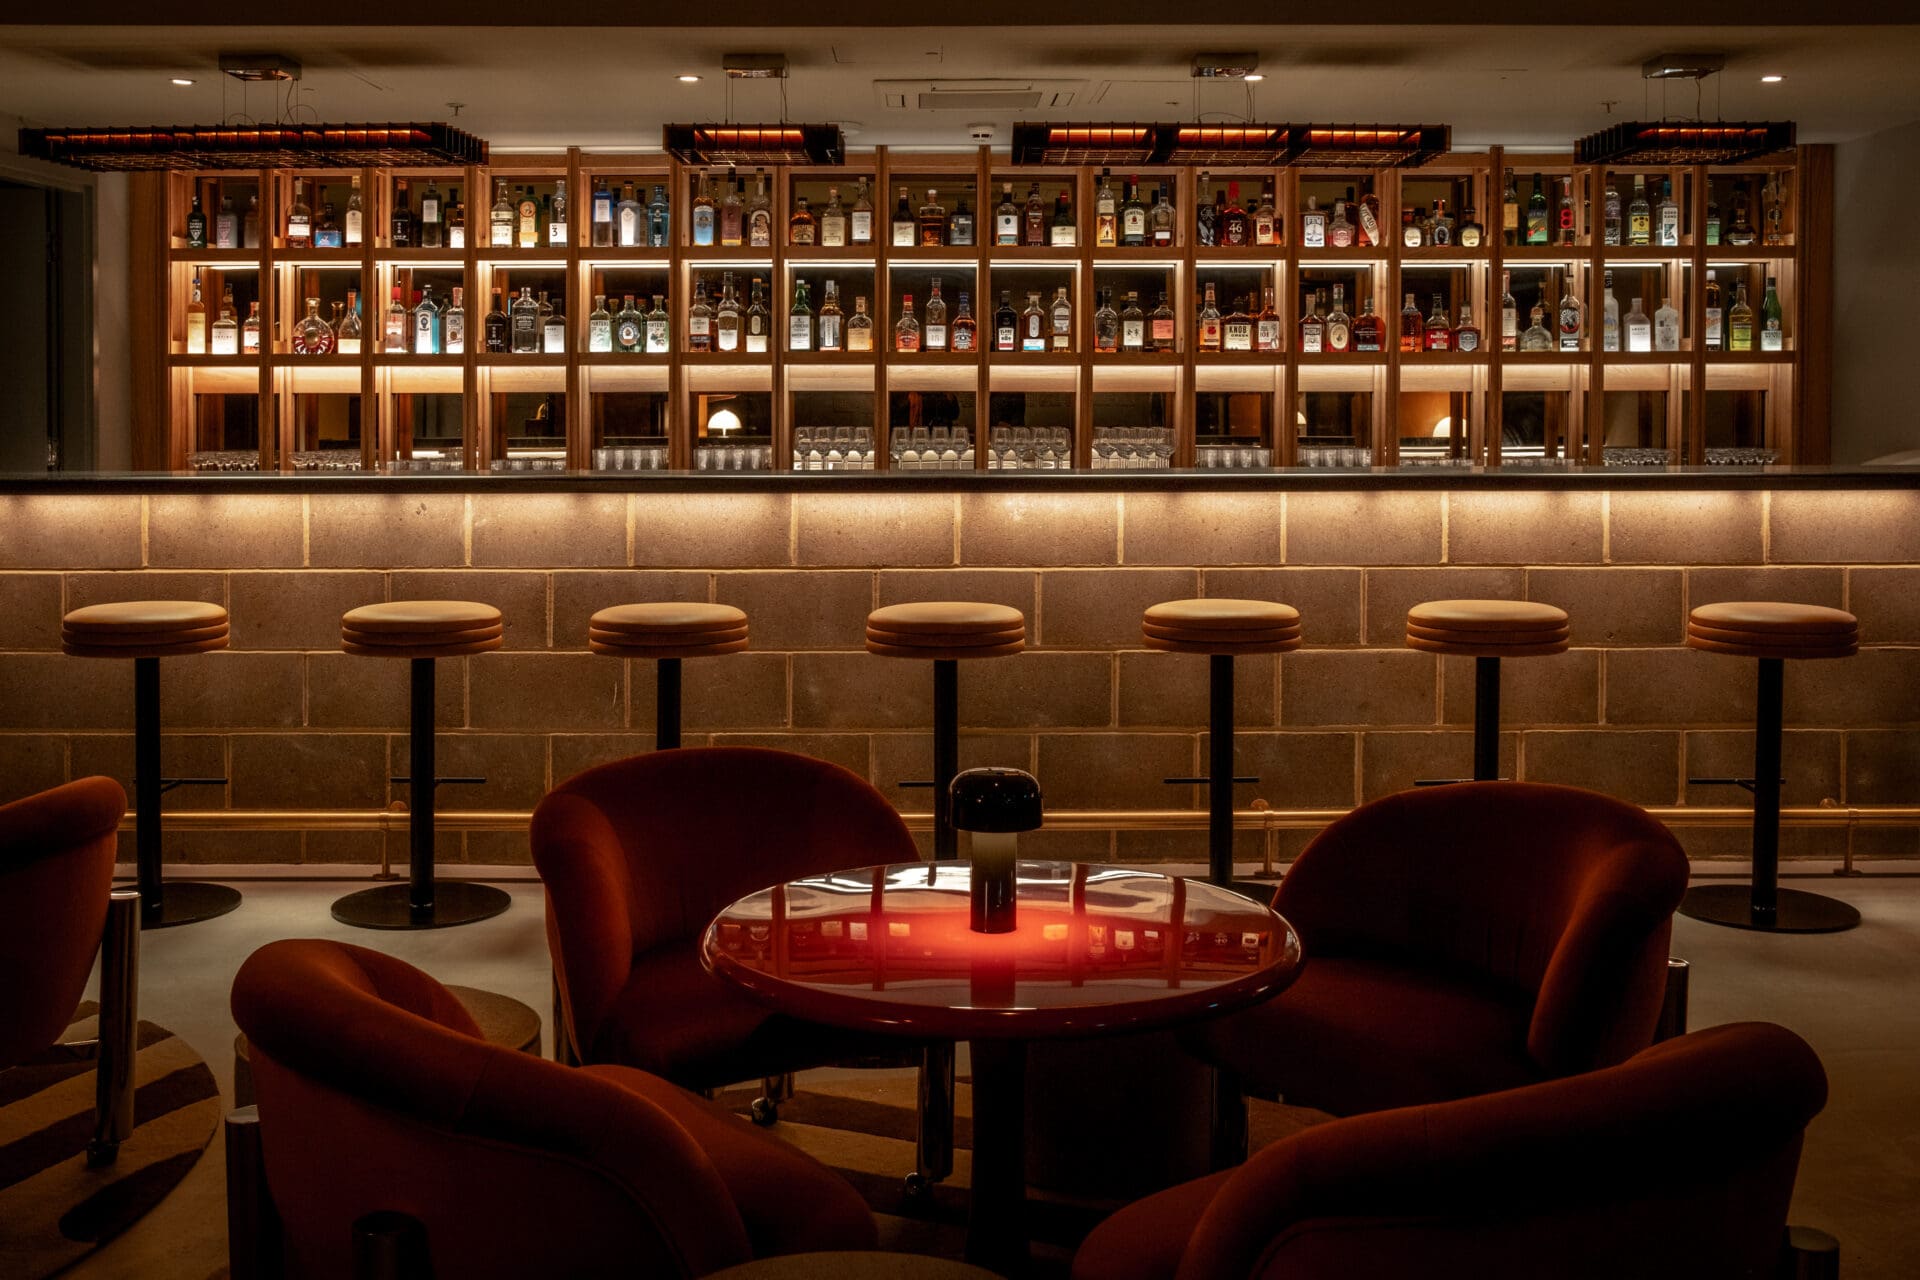 London's best cocktail bars | The bar and stools inside low-lit bar Seed Library inside One Hundred Shoreditch